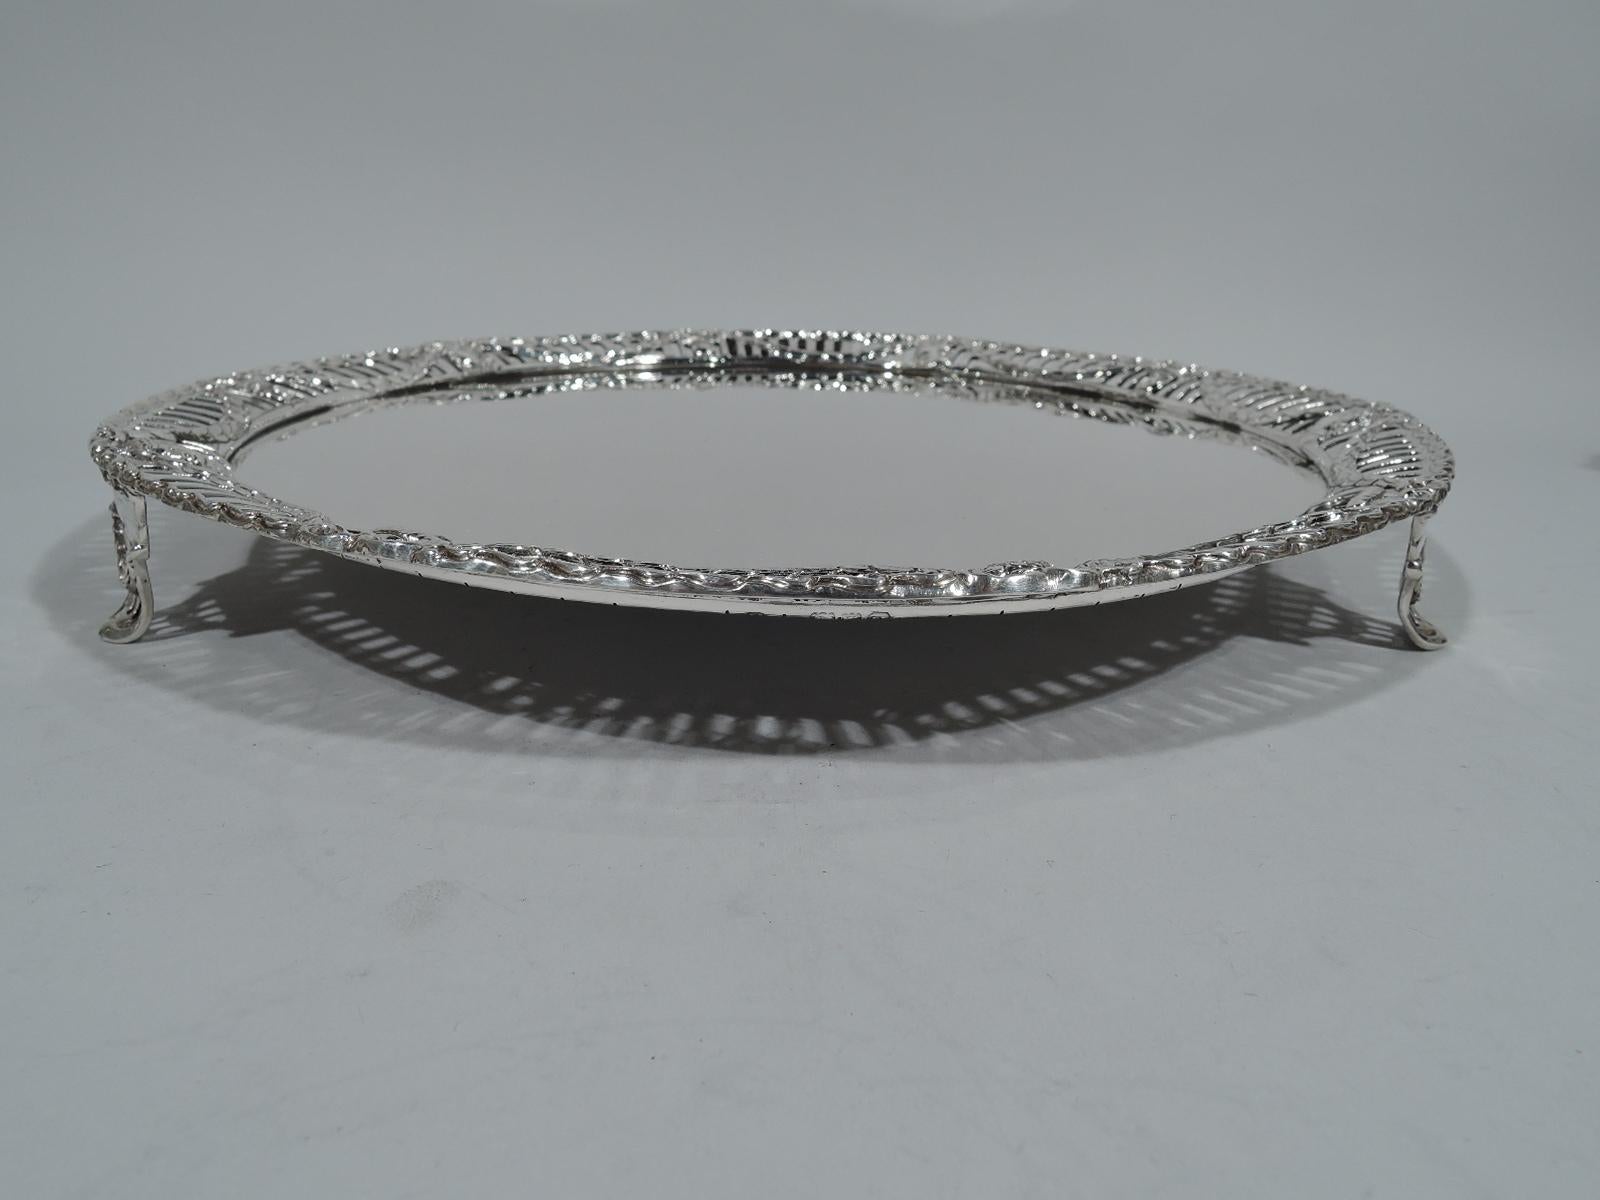 Antique English Edwardian Regency Revival Sterling Silver Salver Tray In Excellent Condition For Sale In New York, NY